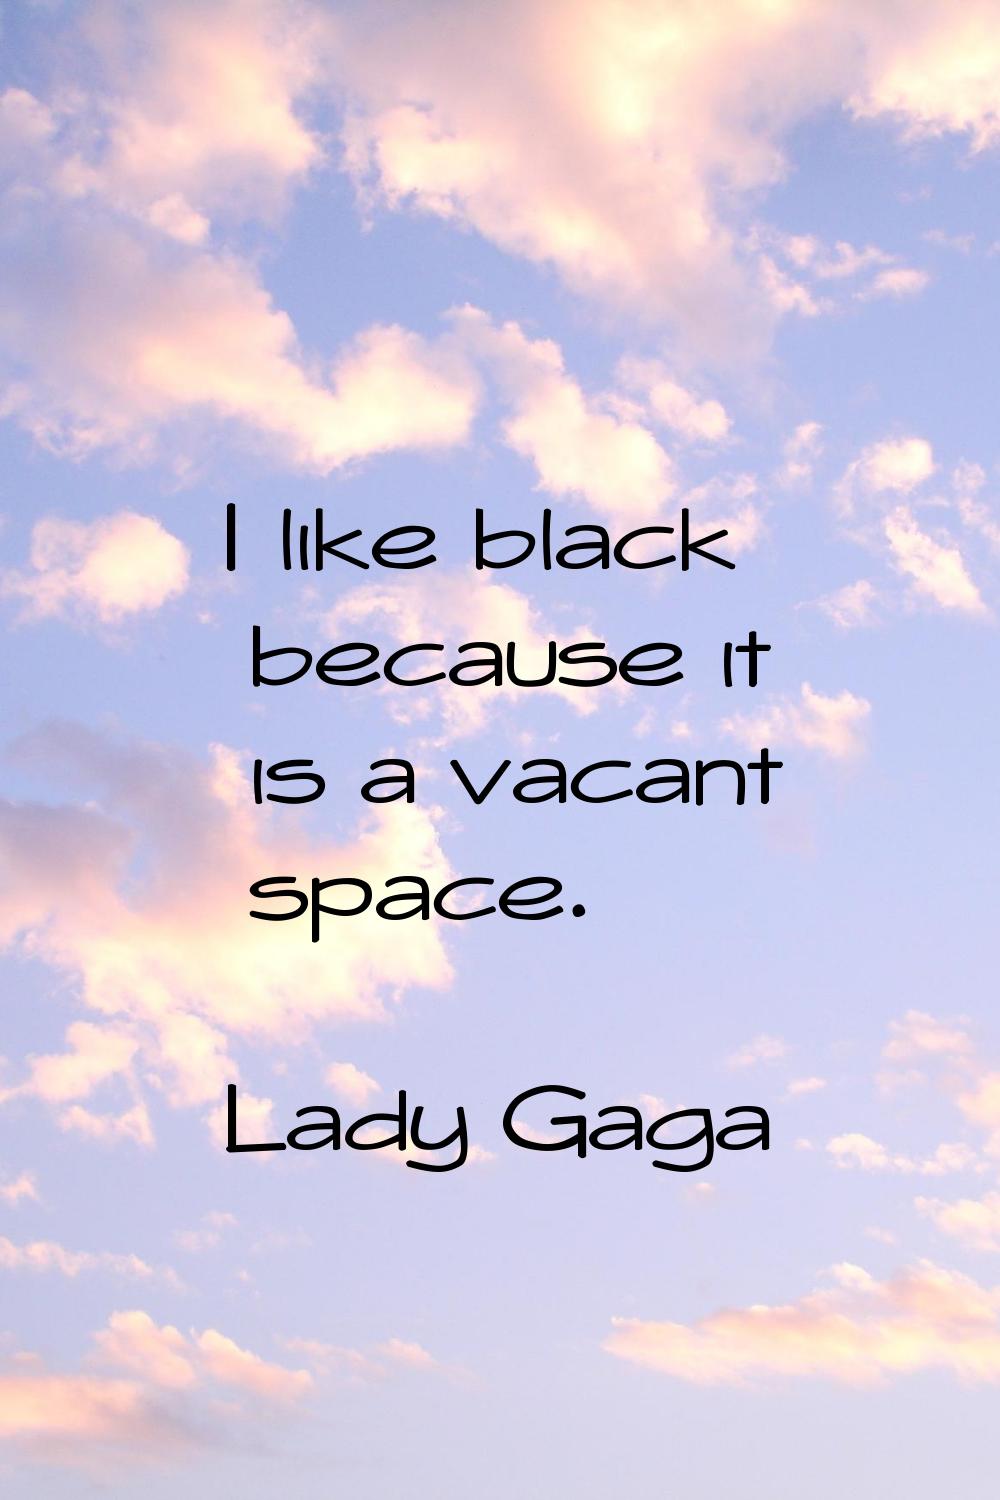 I like black because it is a vacant space.